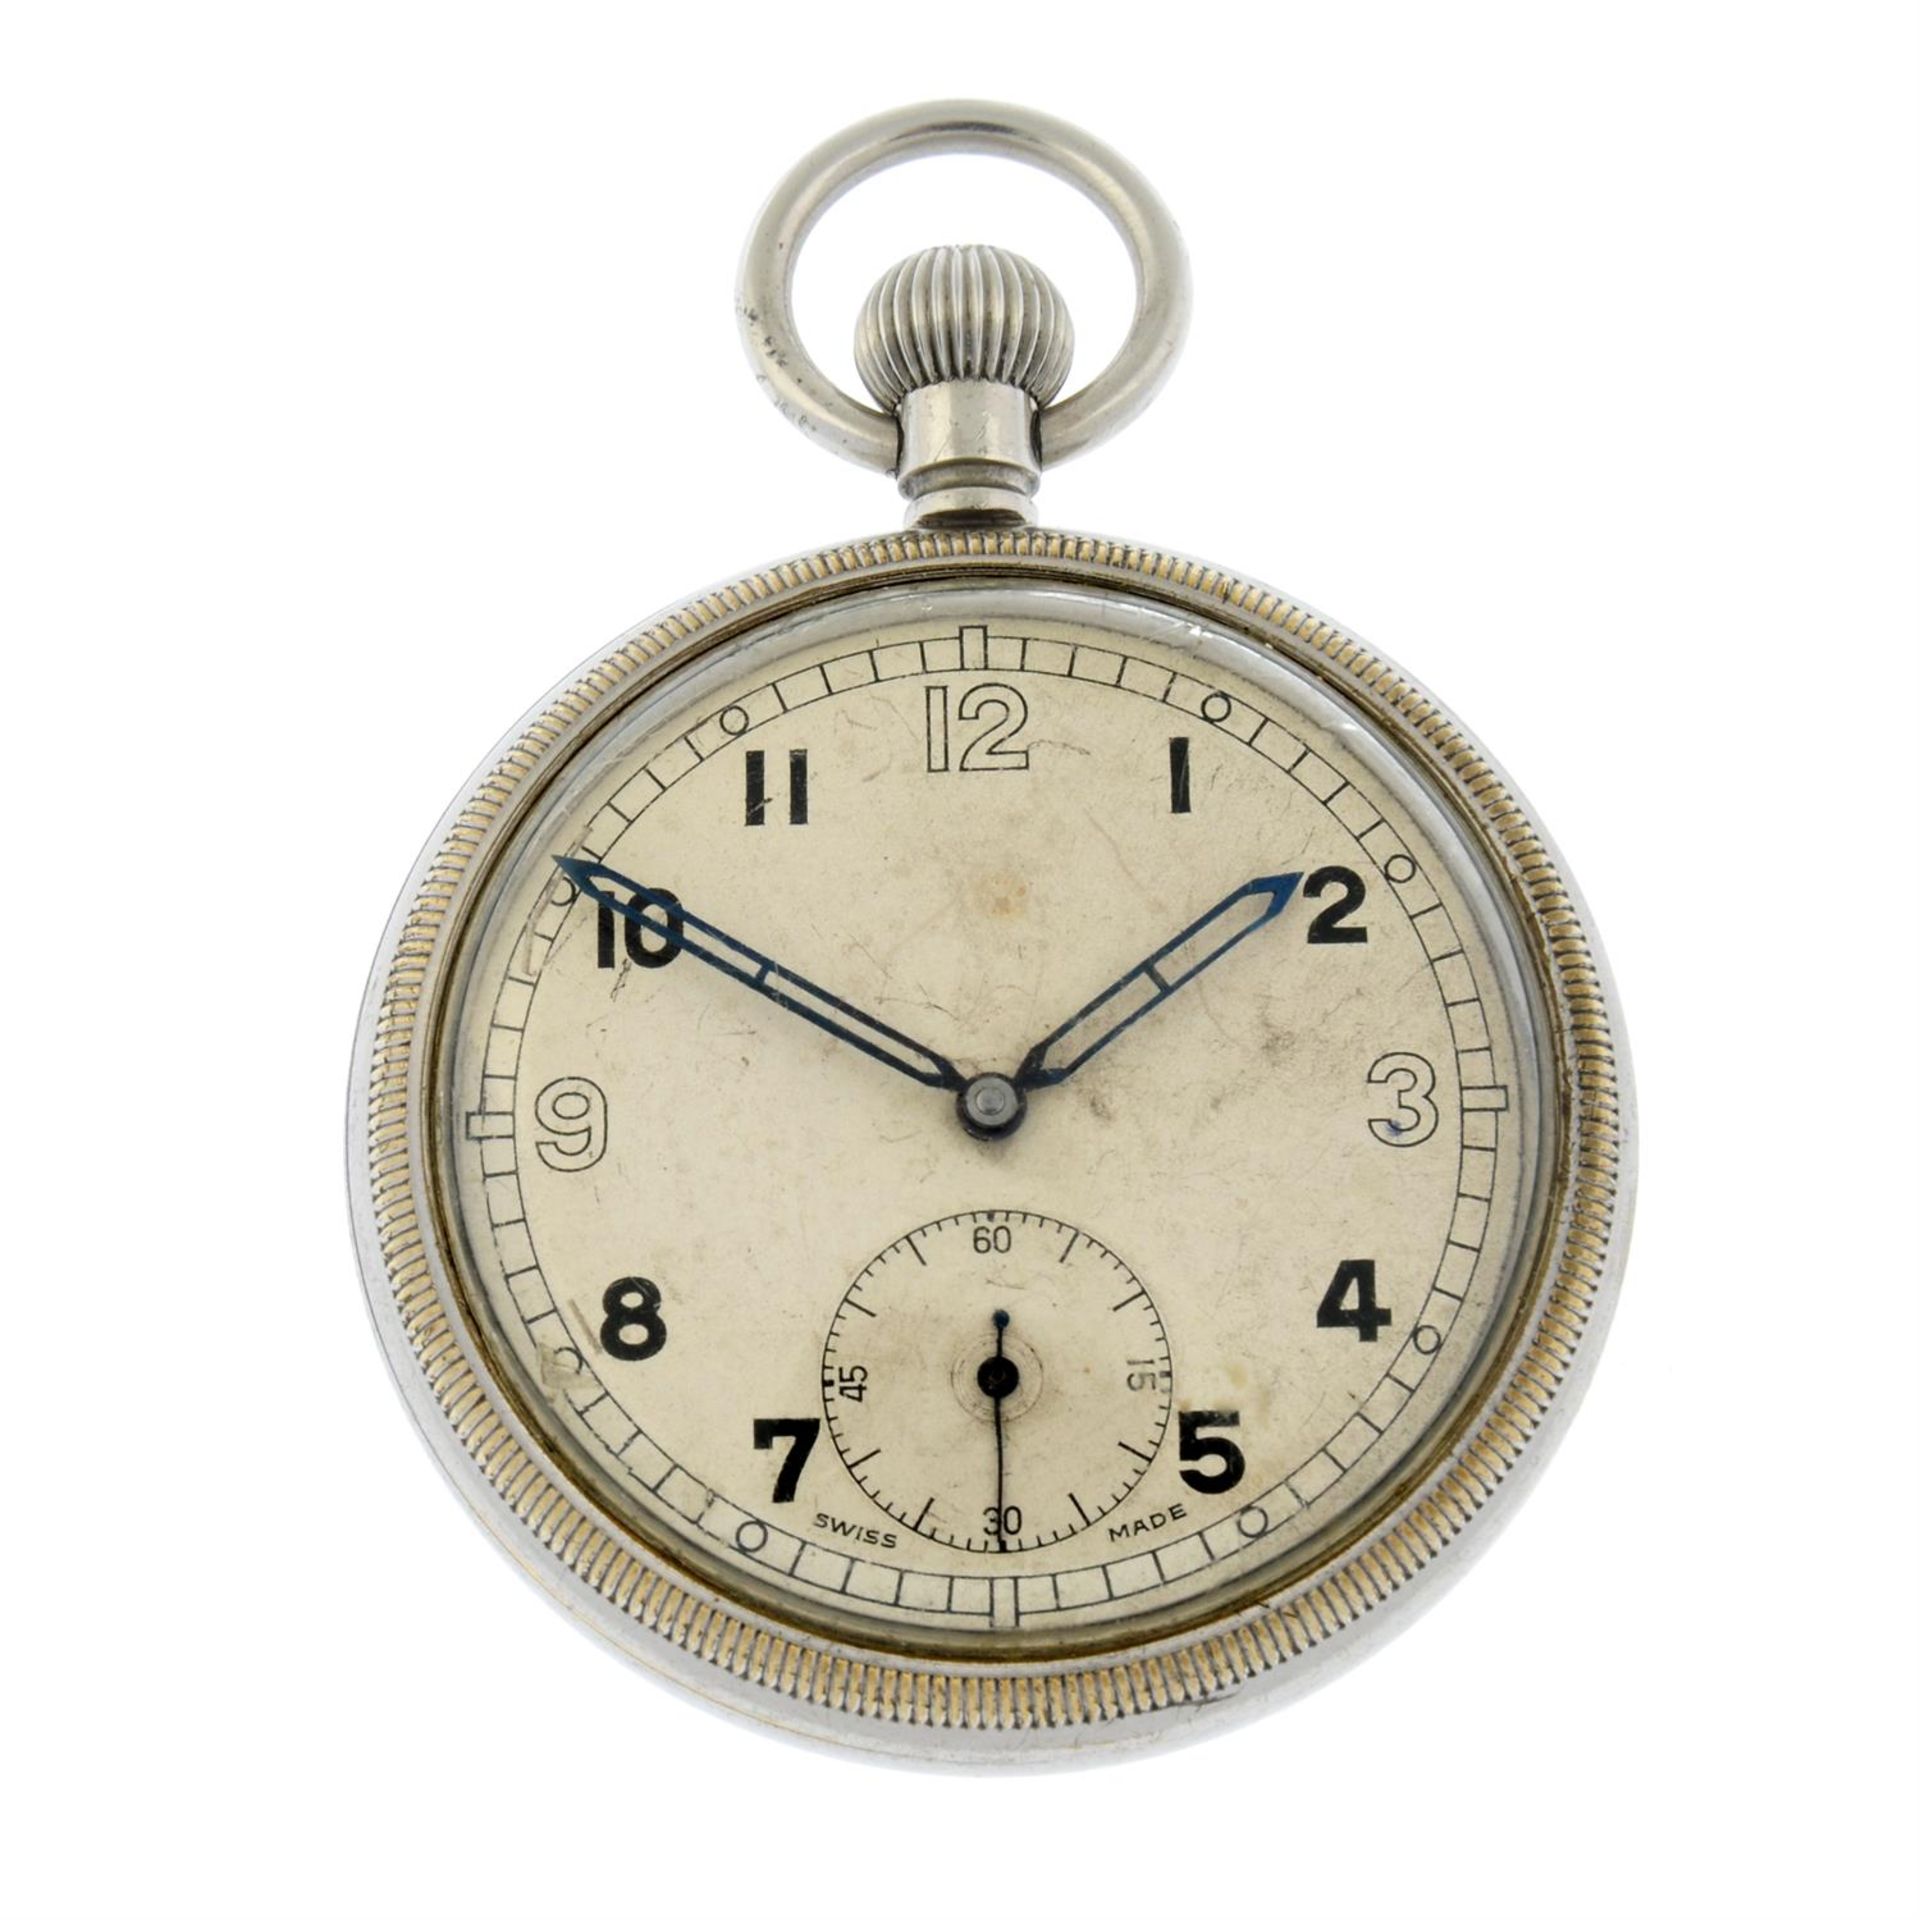 A chrome plated military issue open face pocket watch (52mm) with another military issue pocket